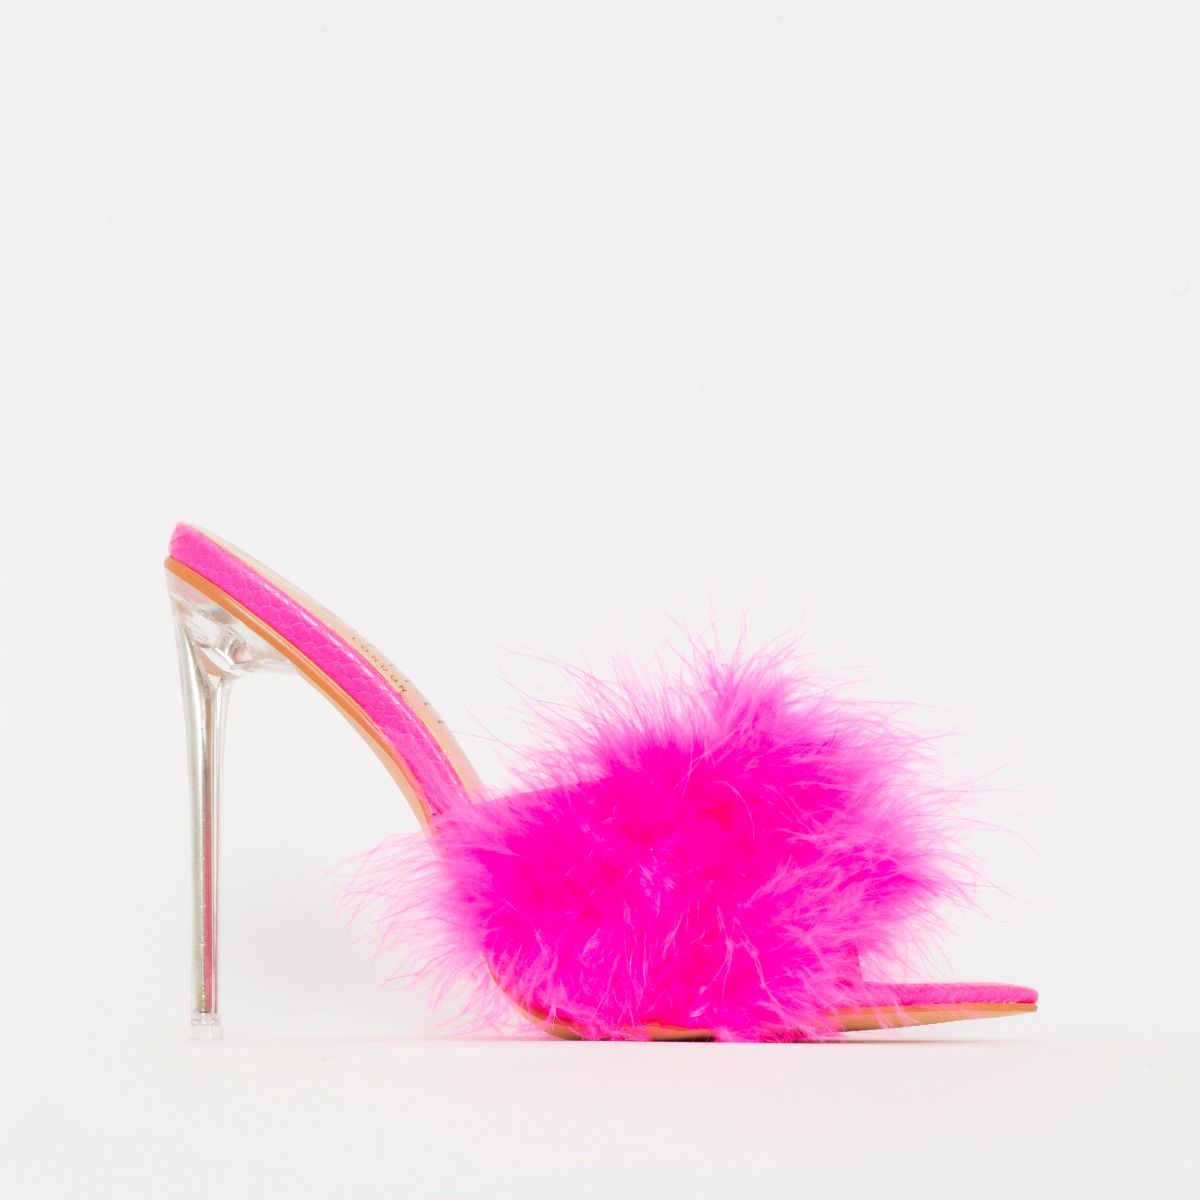 pink heels with feathers